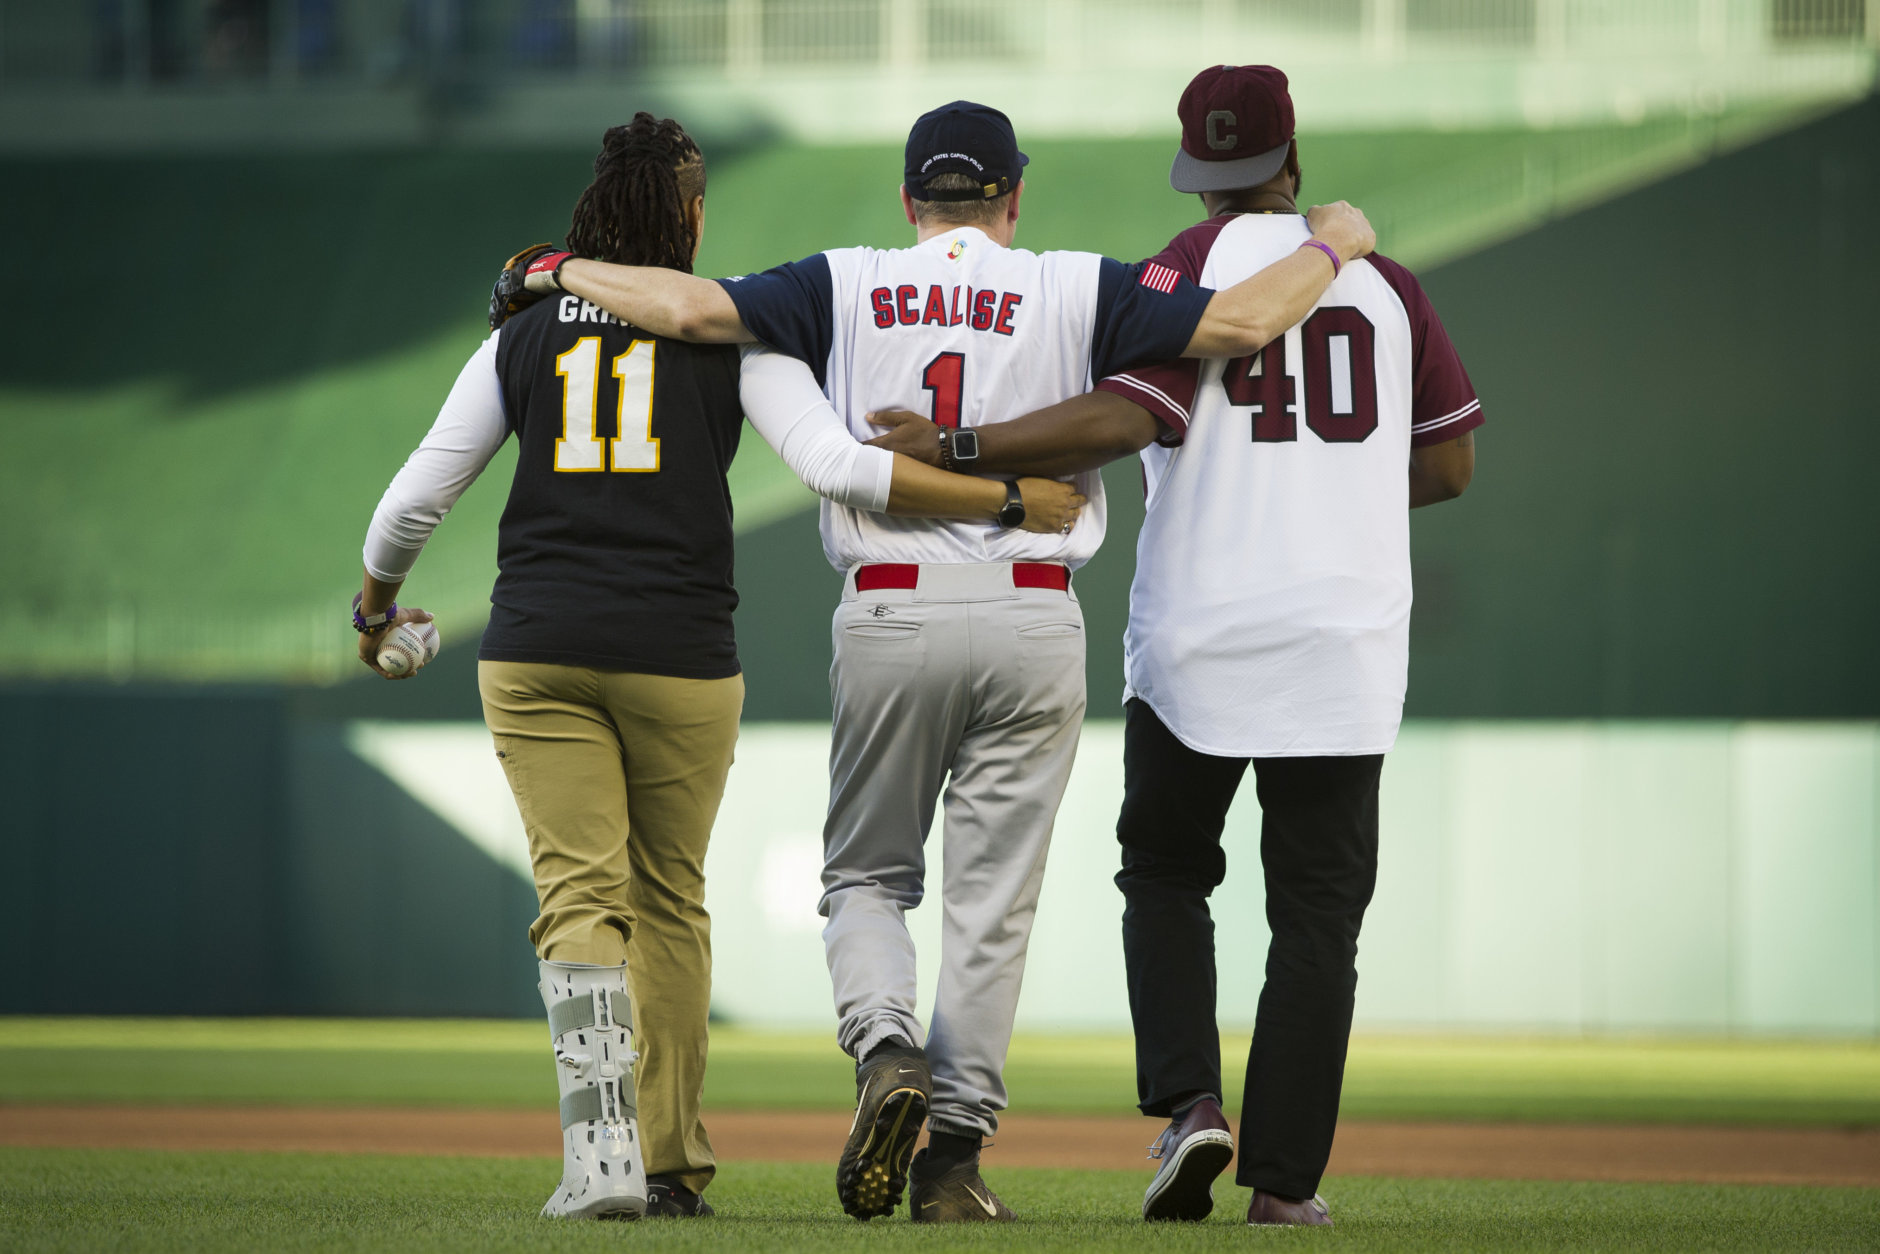 Capitol Police Special Agents Crystal Griner, left, and David Bailey, right, assist U.S. Rep. Steve Scalise to his position at second base at the start of the 57th Congressional Baseball Game at National's Park in Washington, Thursday, June 14, 2018. On June 14, 2017, Scalise was wounded in the leg when he and other Congressional members were the victims of a shooting at the baseball field they were practicing on in Alexandria, Va. (AP Photo/Cliff Owen)